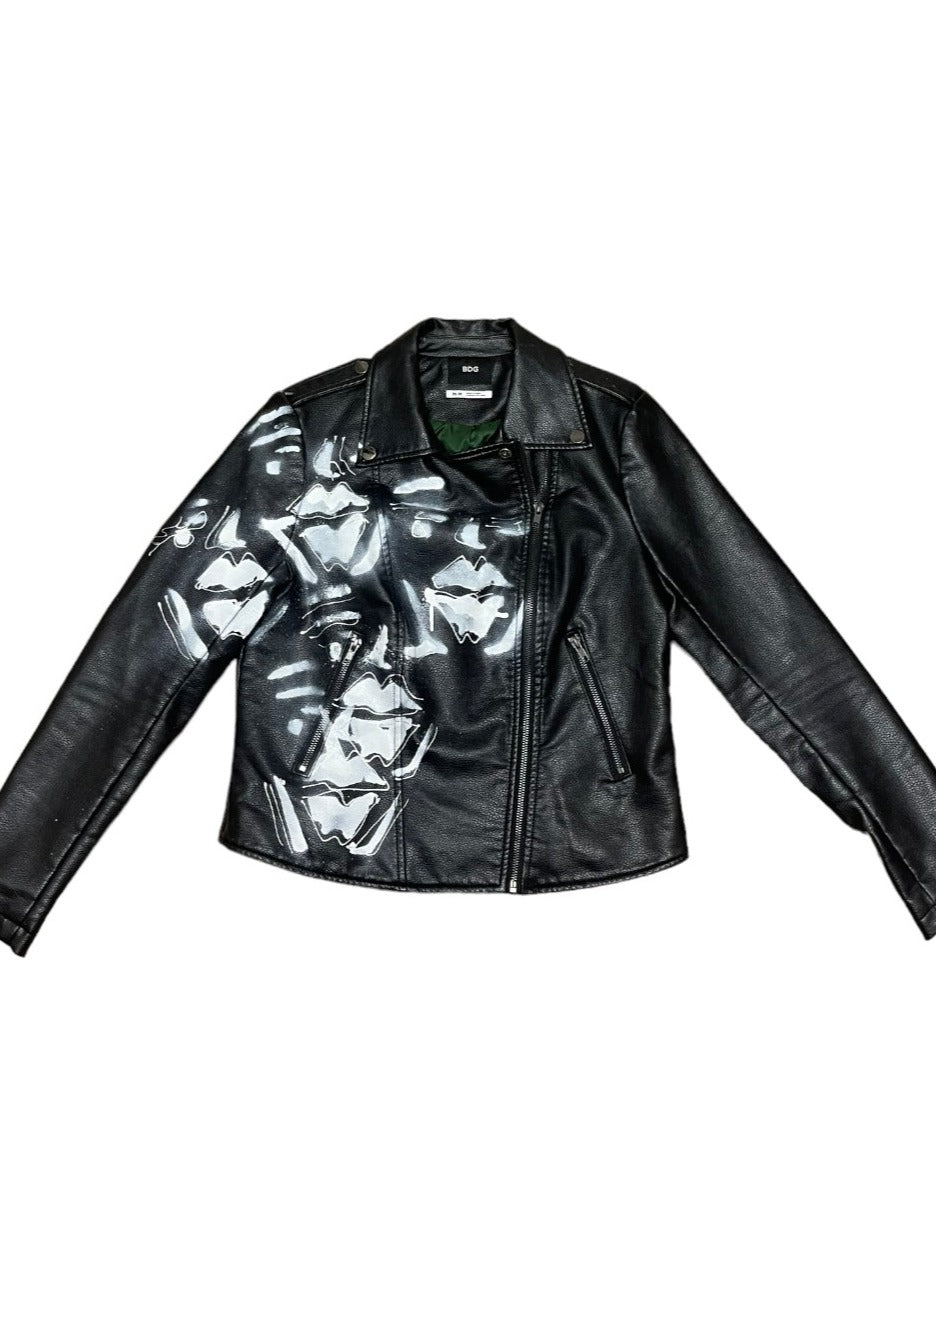 RIGHT HAND LEATHER JACKET